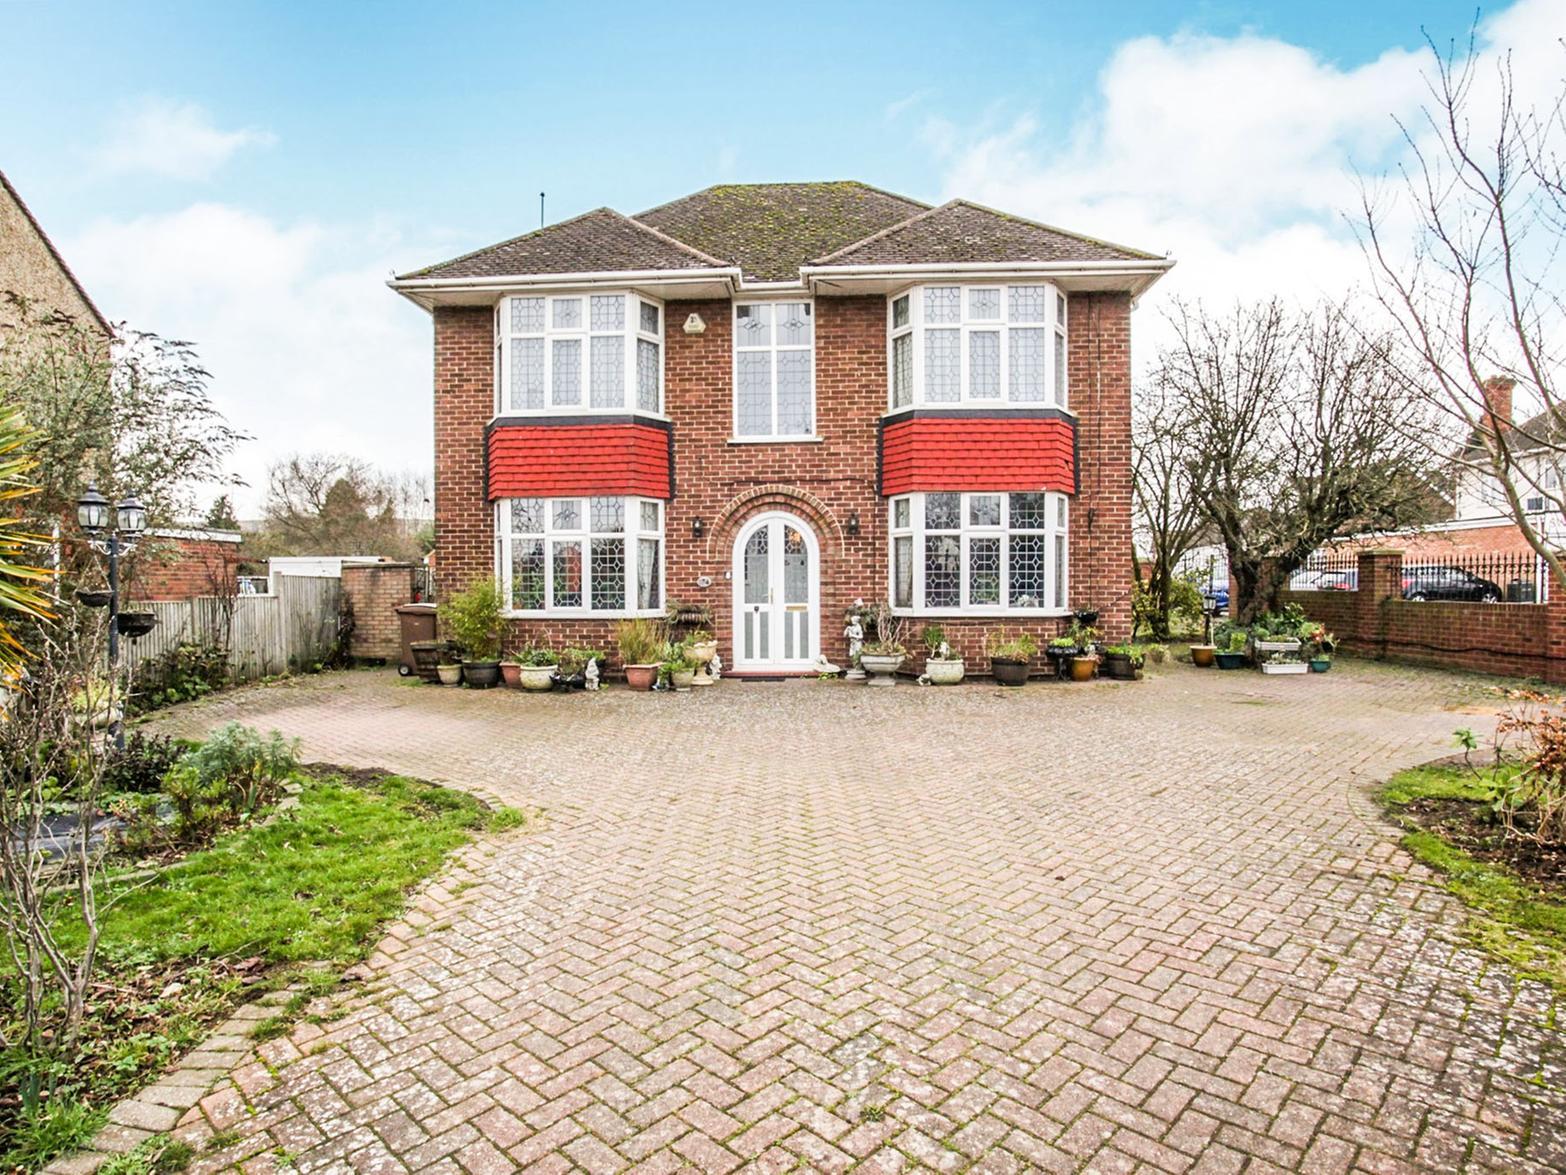 Barton Road, Luton LU3. This impressive five bedroom detached family home is situated on the sought after Barton Road area of North Luton, located within close proximity to local amenities. Property agent: Connells